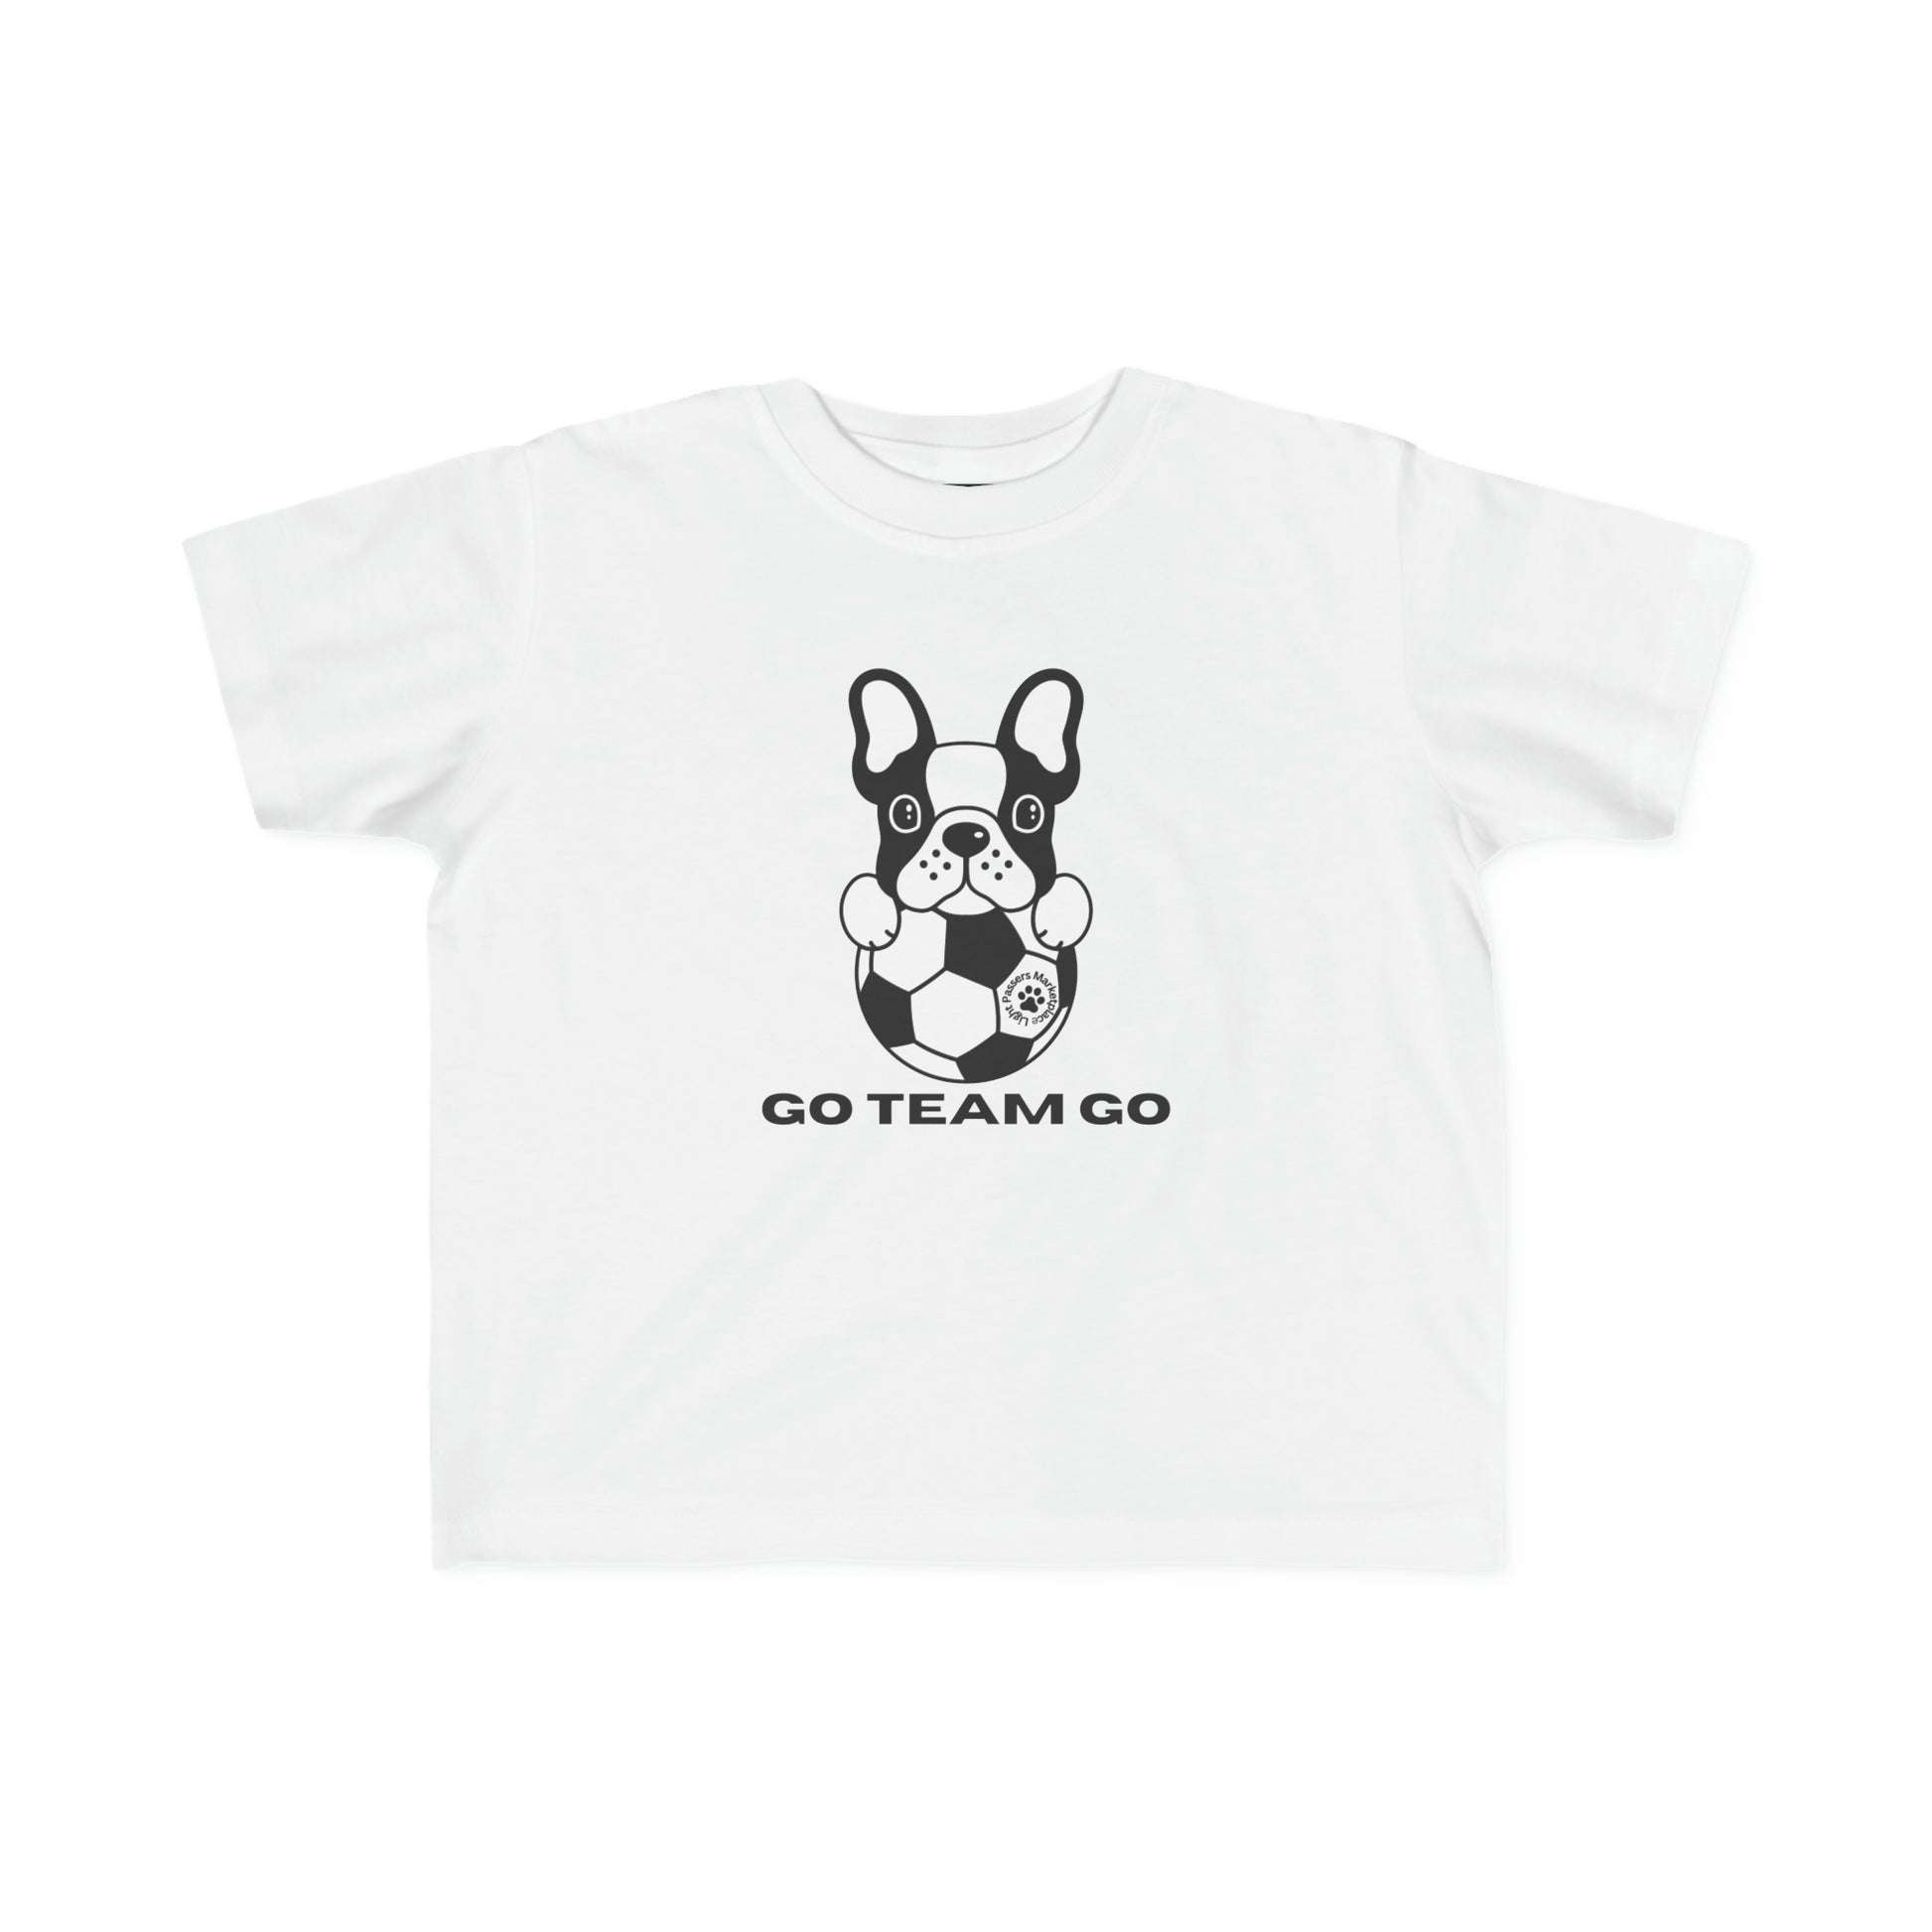 A toddler's white tee featuring a dog with a football, crafted from soft 100% combed cotton. Durable print, light fabric, tear-away label, classic fit, true to size.